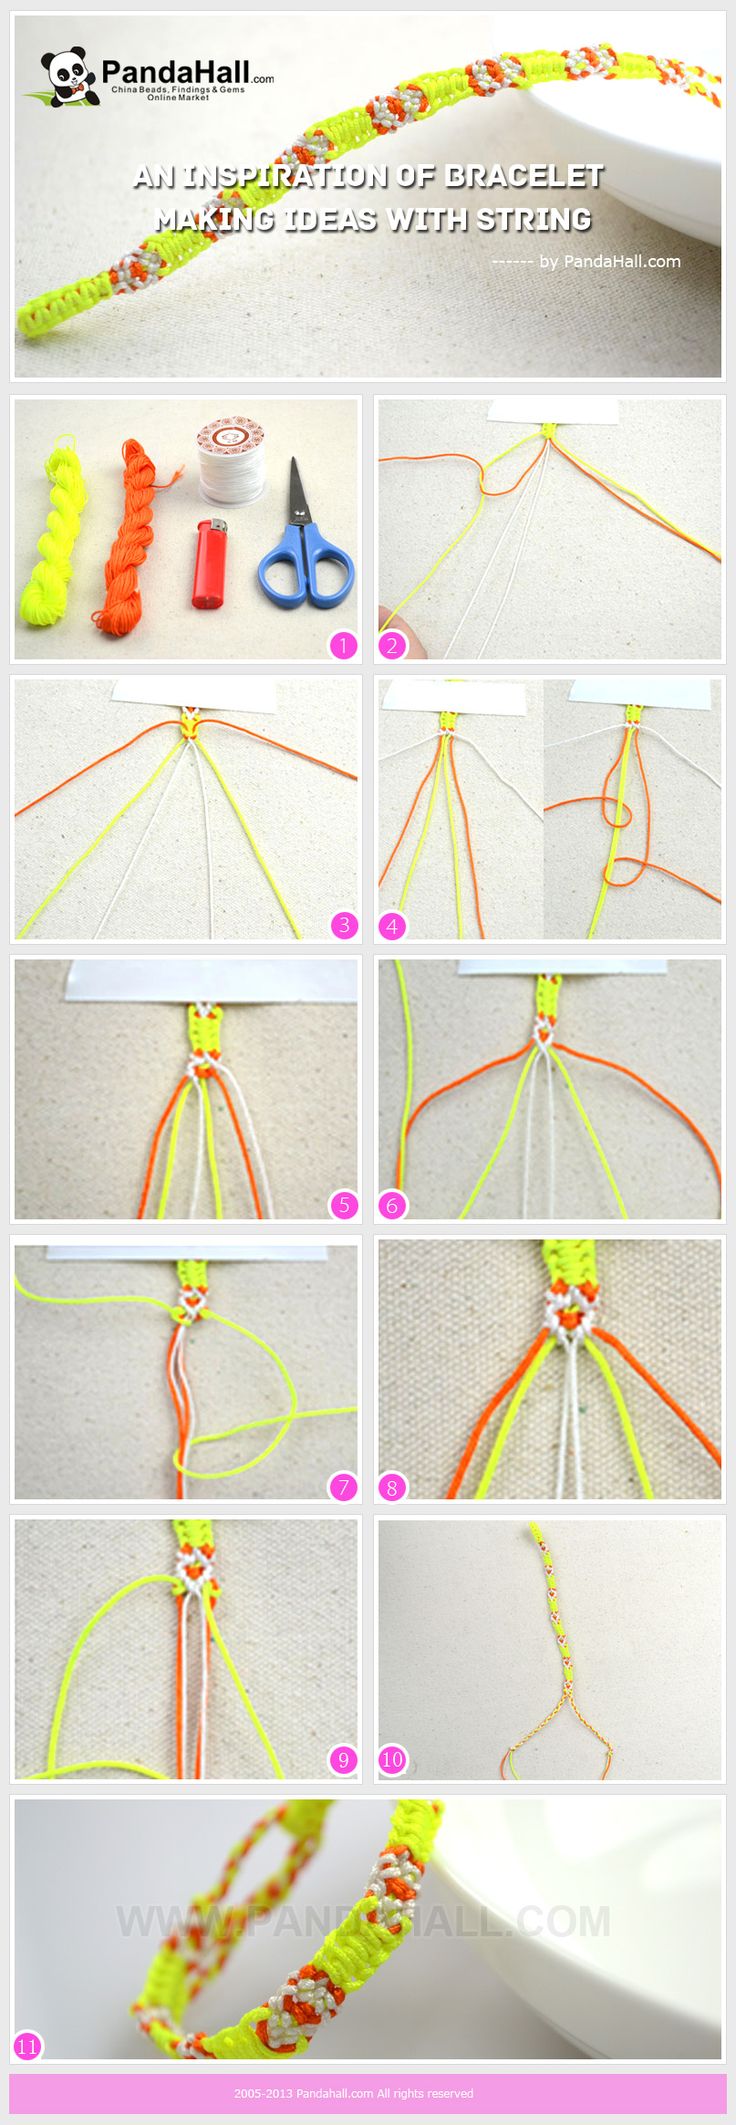 easy instructions on how to macrame